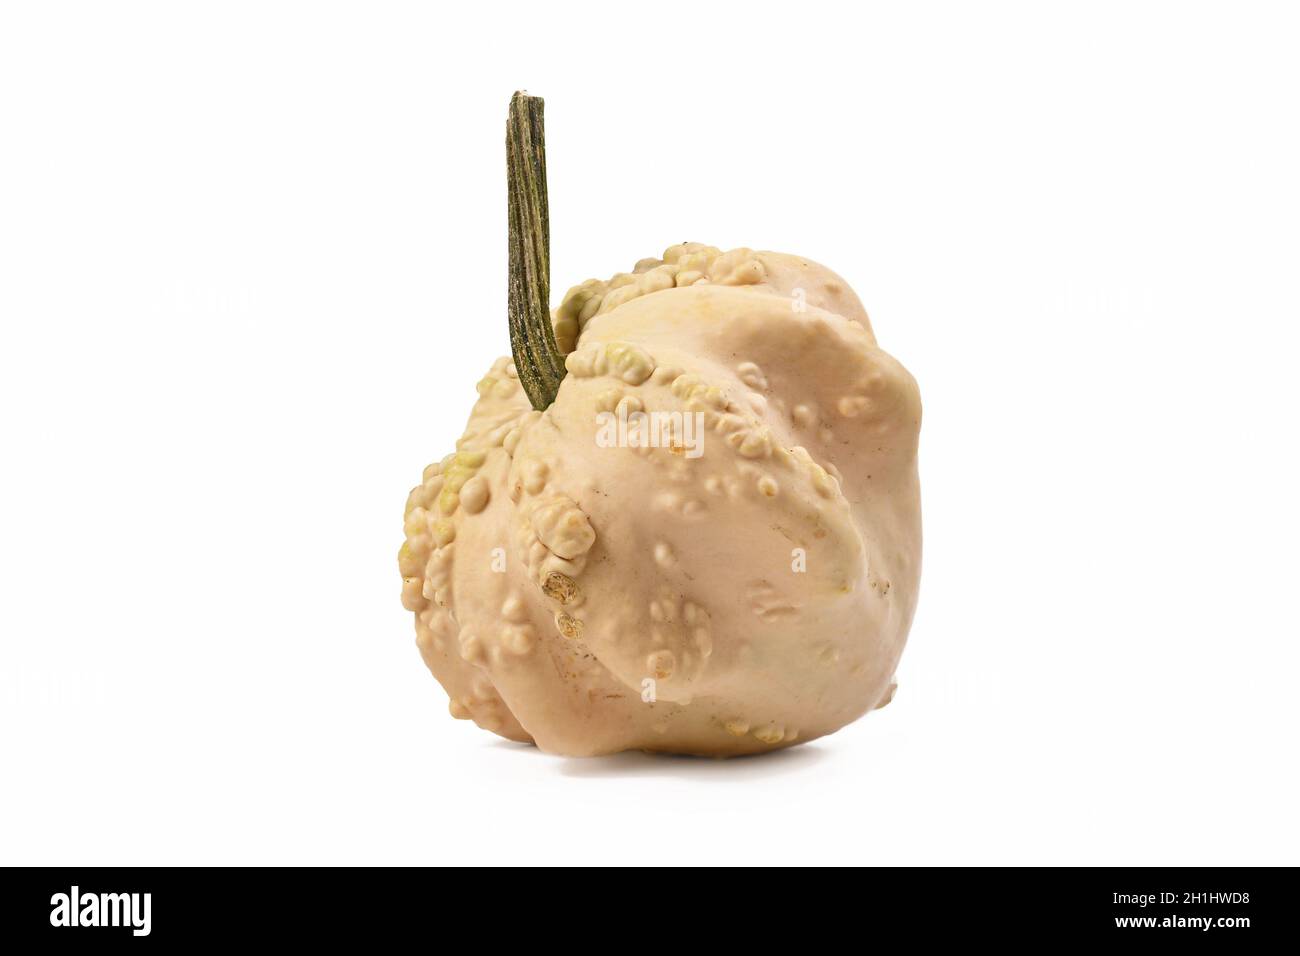 Cream colored ornamental gourd pumpkin with warted skin on white background Stock Photo